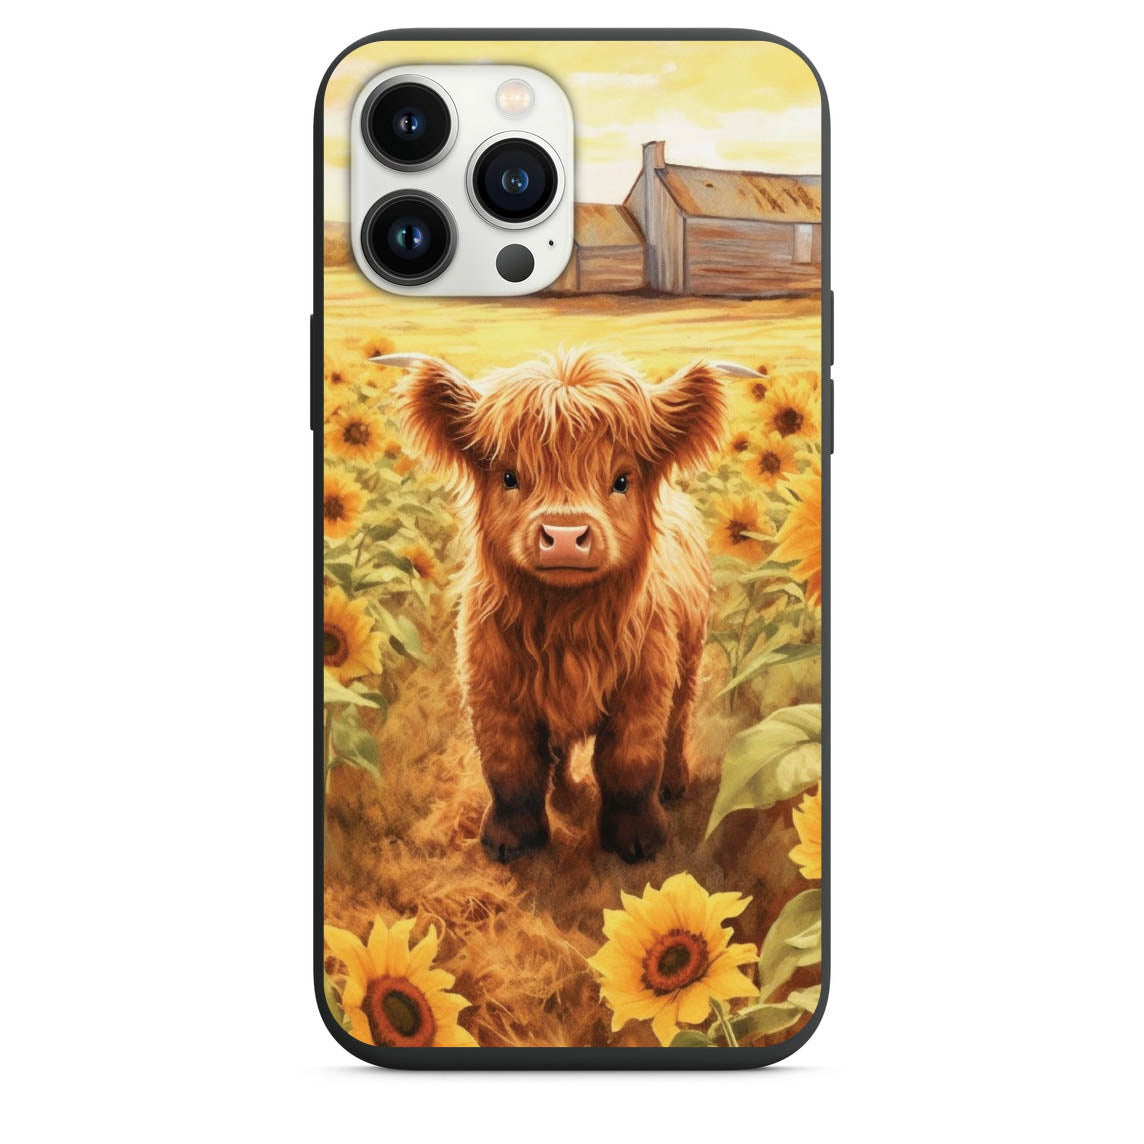 Cute Highland Cow In A Sunflower Field Phone Case for iPhone 7 8 X XS XR SE 11 12 13 14 Pro Max Mini Note 10 20 s10 s10s s20 s21 20 Plus Ultra